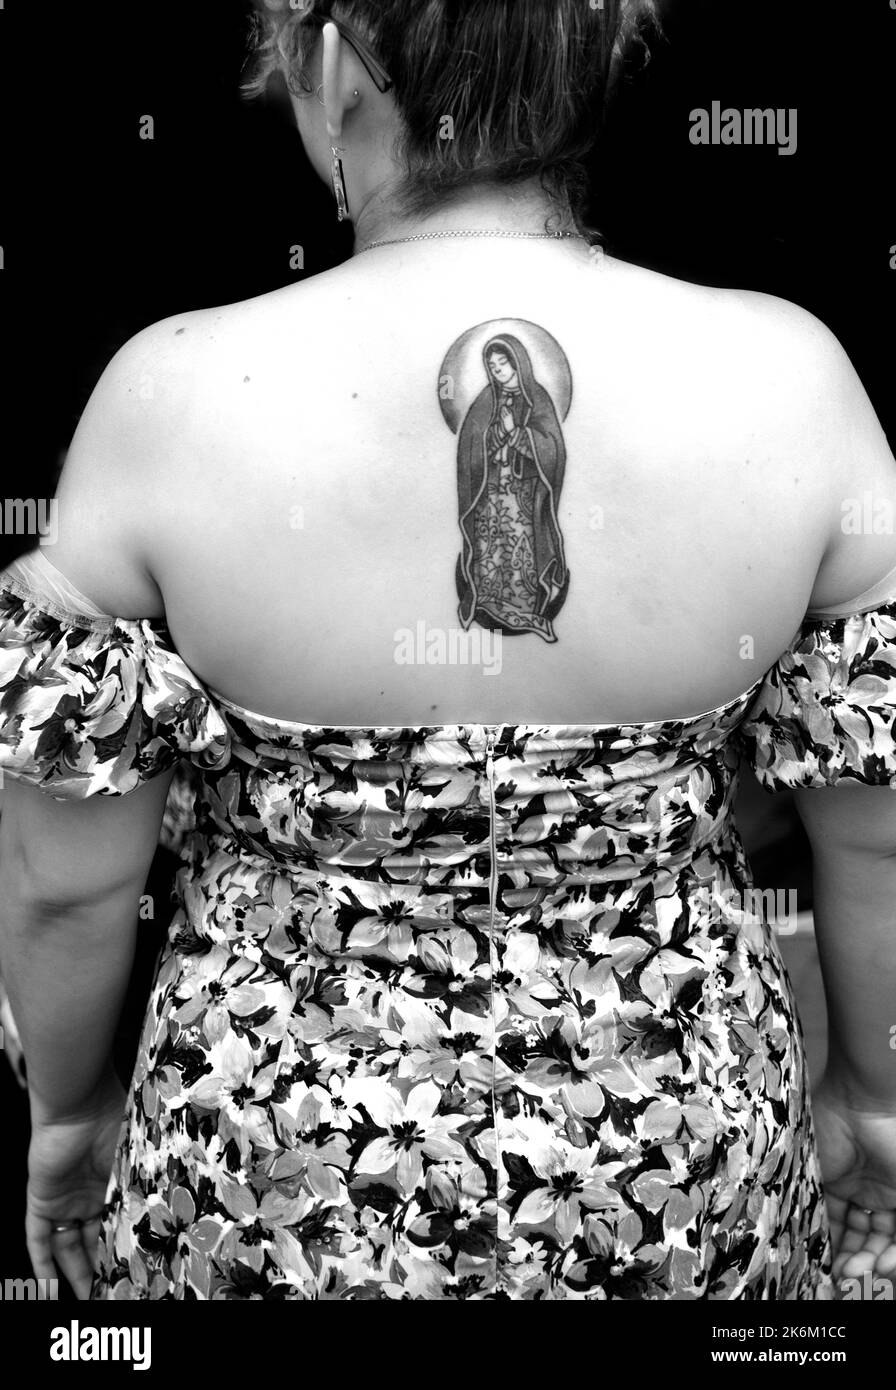 SA mans giant Virgen de Guadalupe tattoo took months over 4000 to  complete